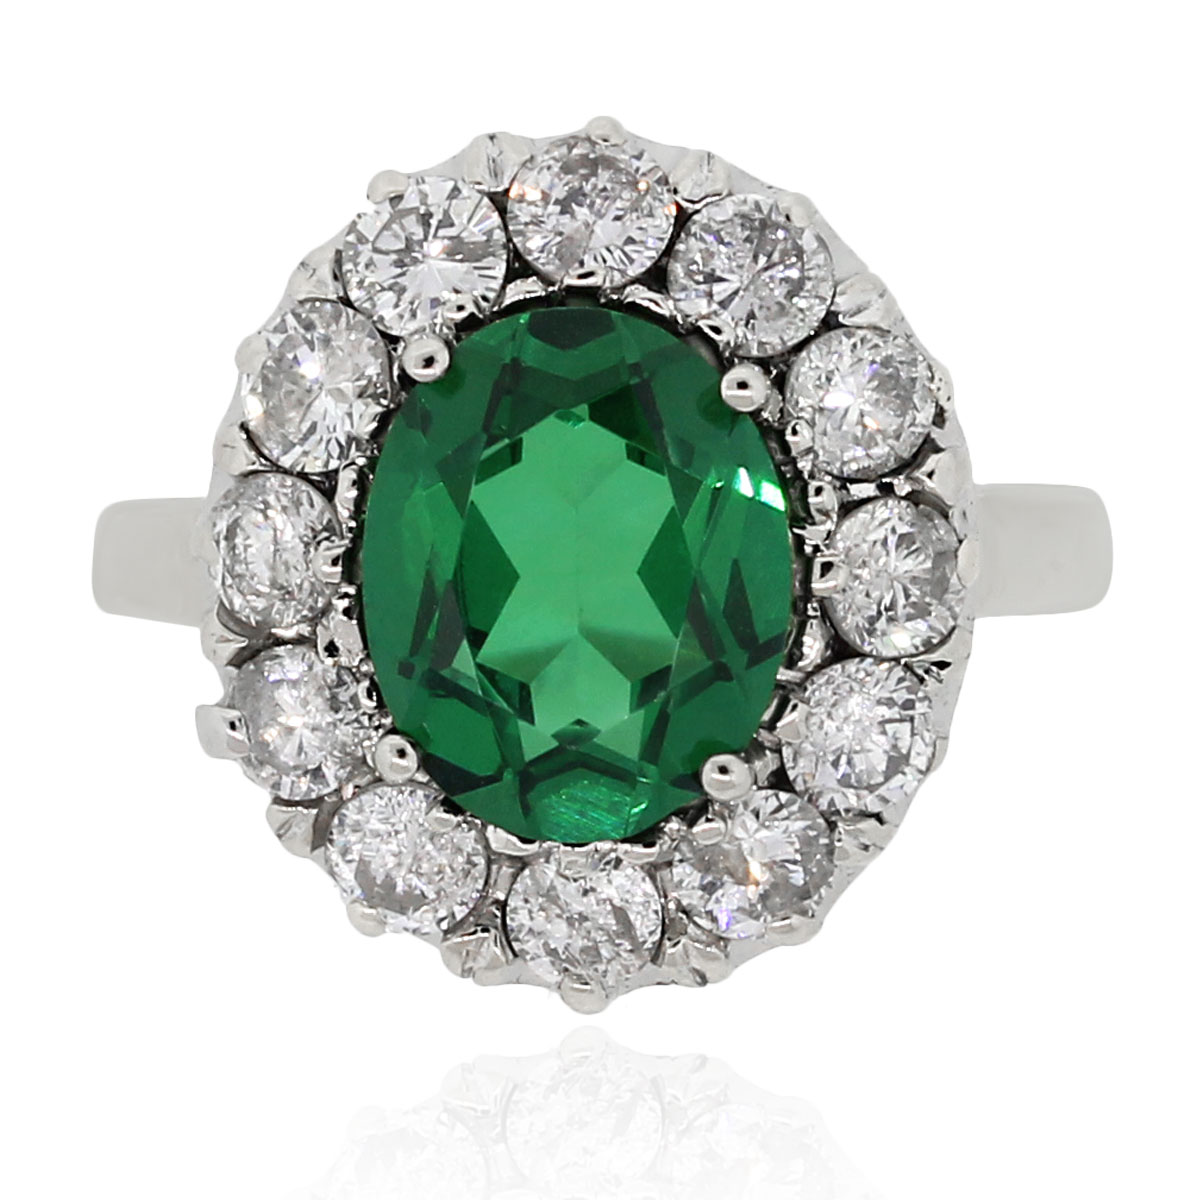 Buy quality 925 sterling silver GREEN diamond DESIGNER RING in Ahmedabad